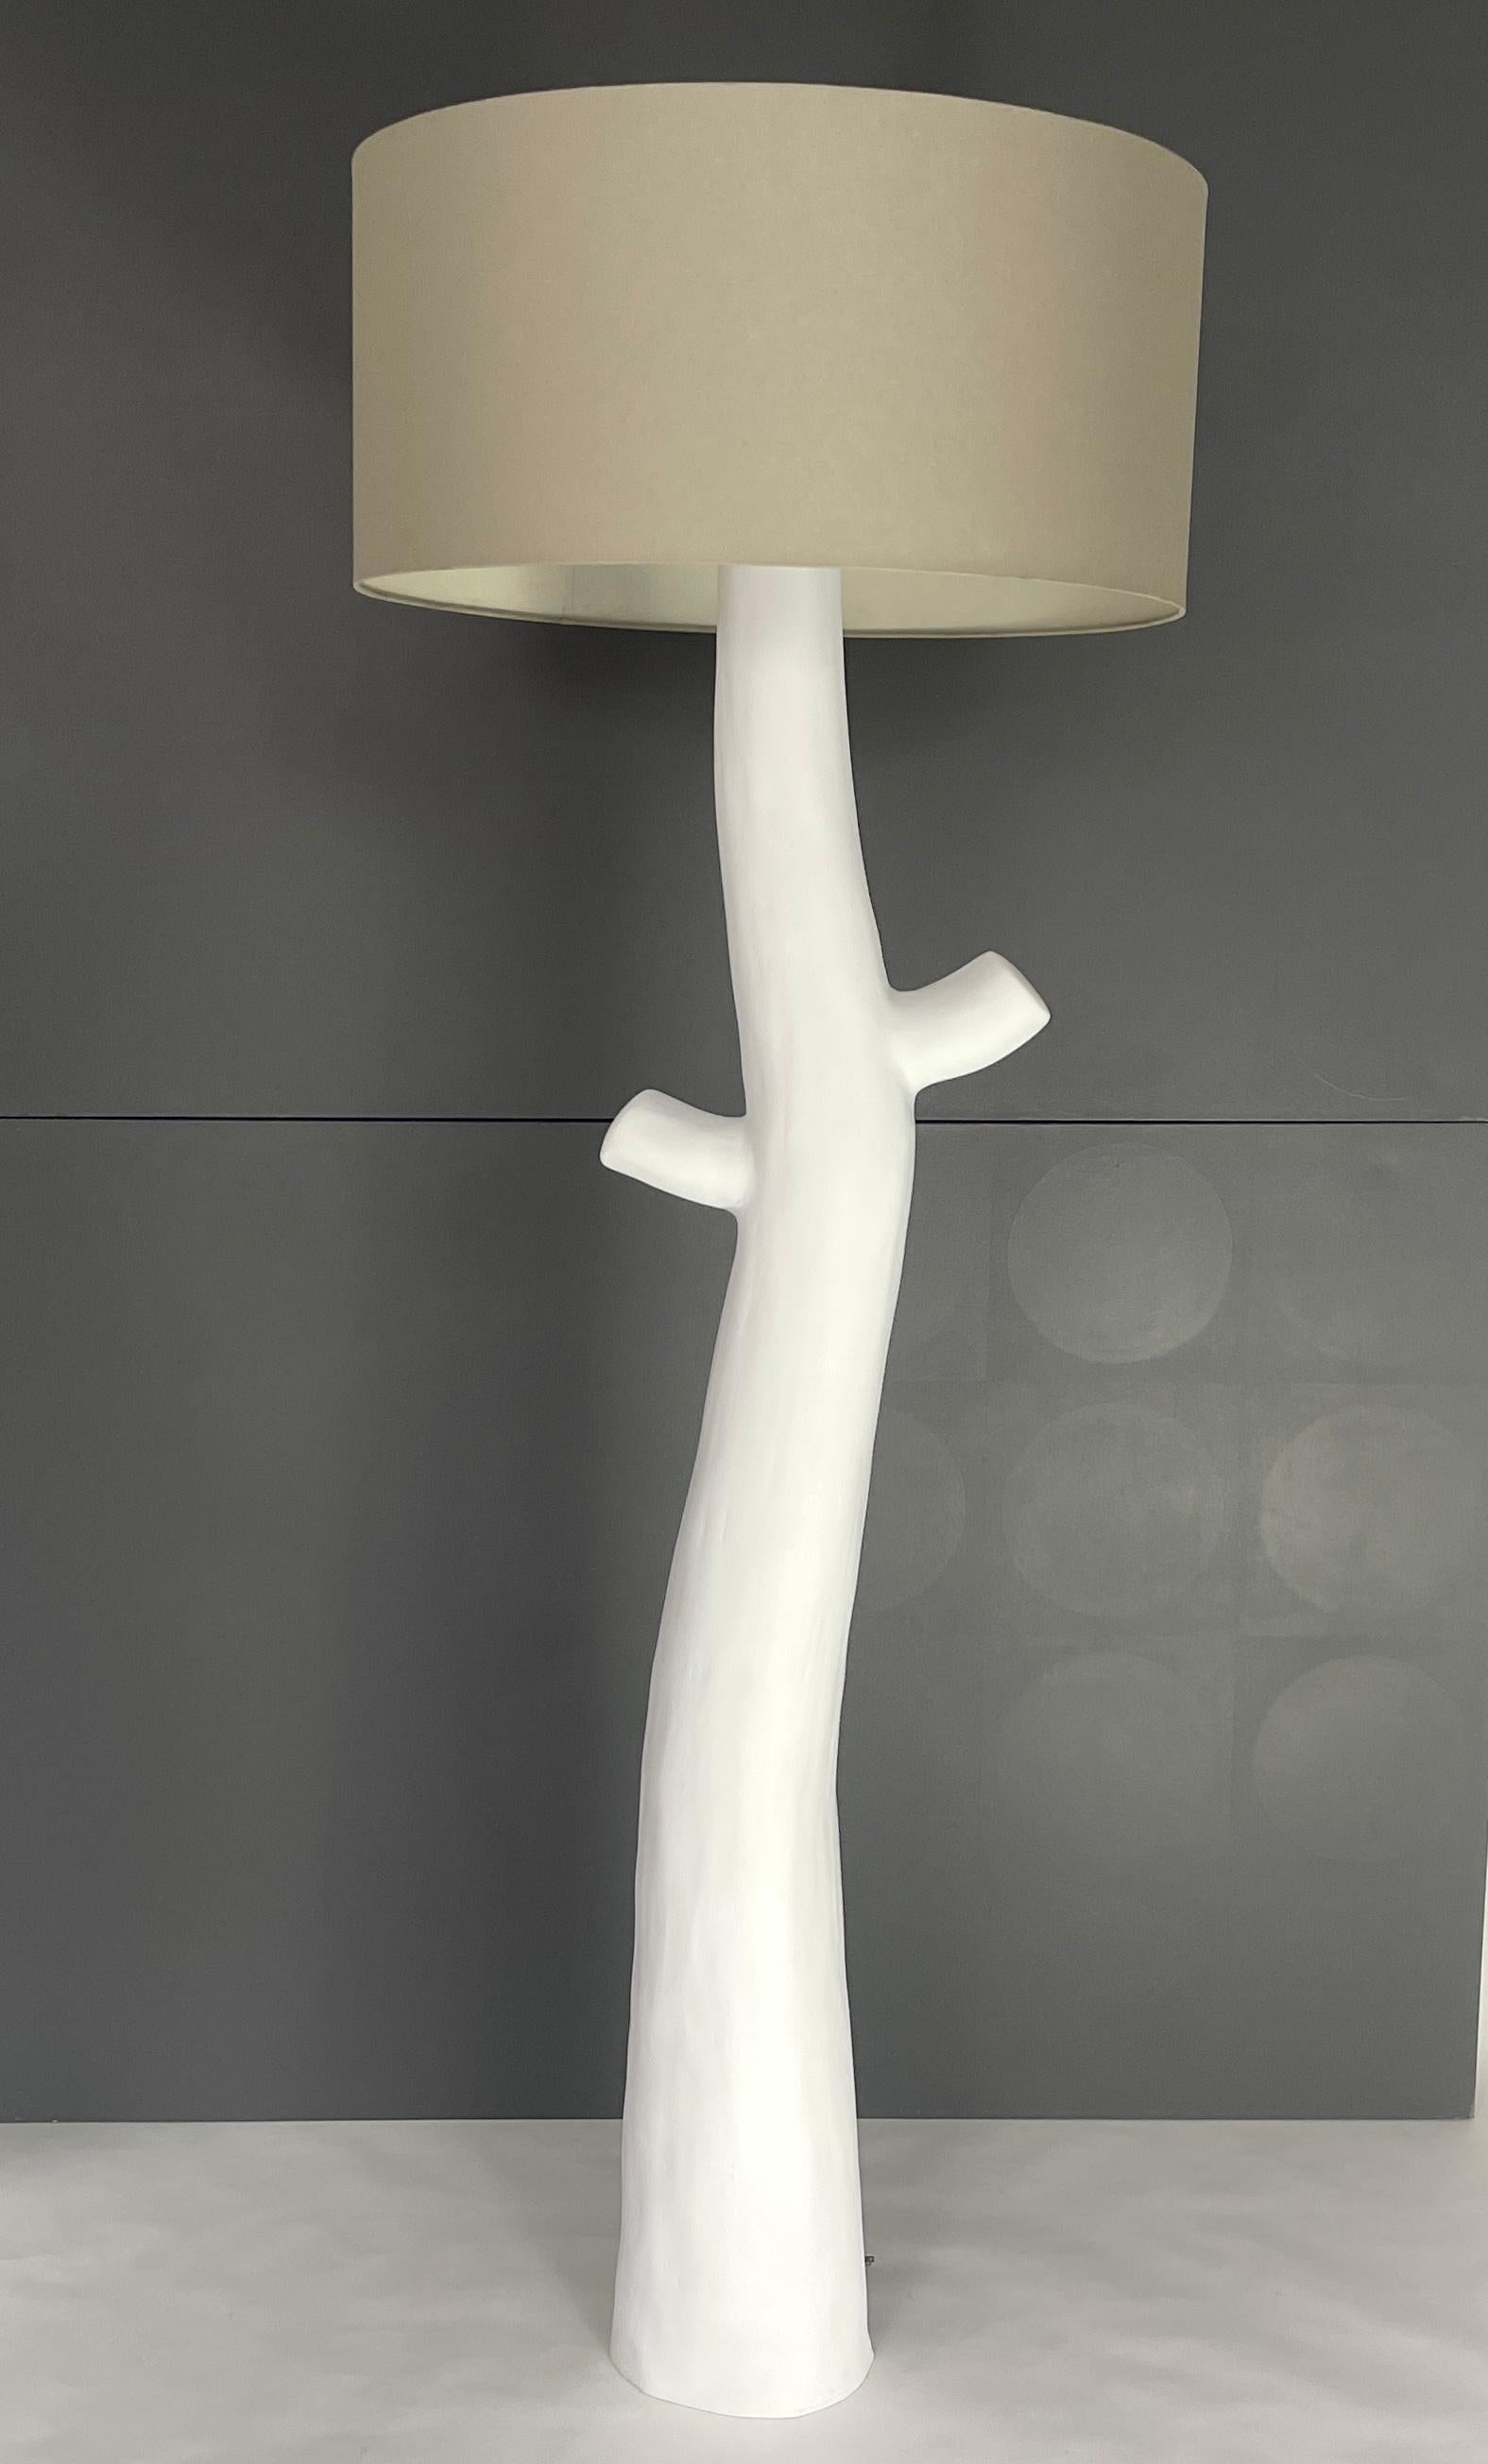 Plaster of Paris floor lamp based on 1940s French Design. Linen Drum Shade. Dimensions: 14